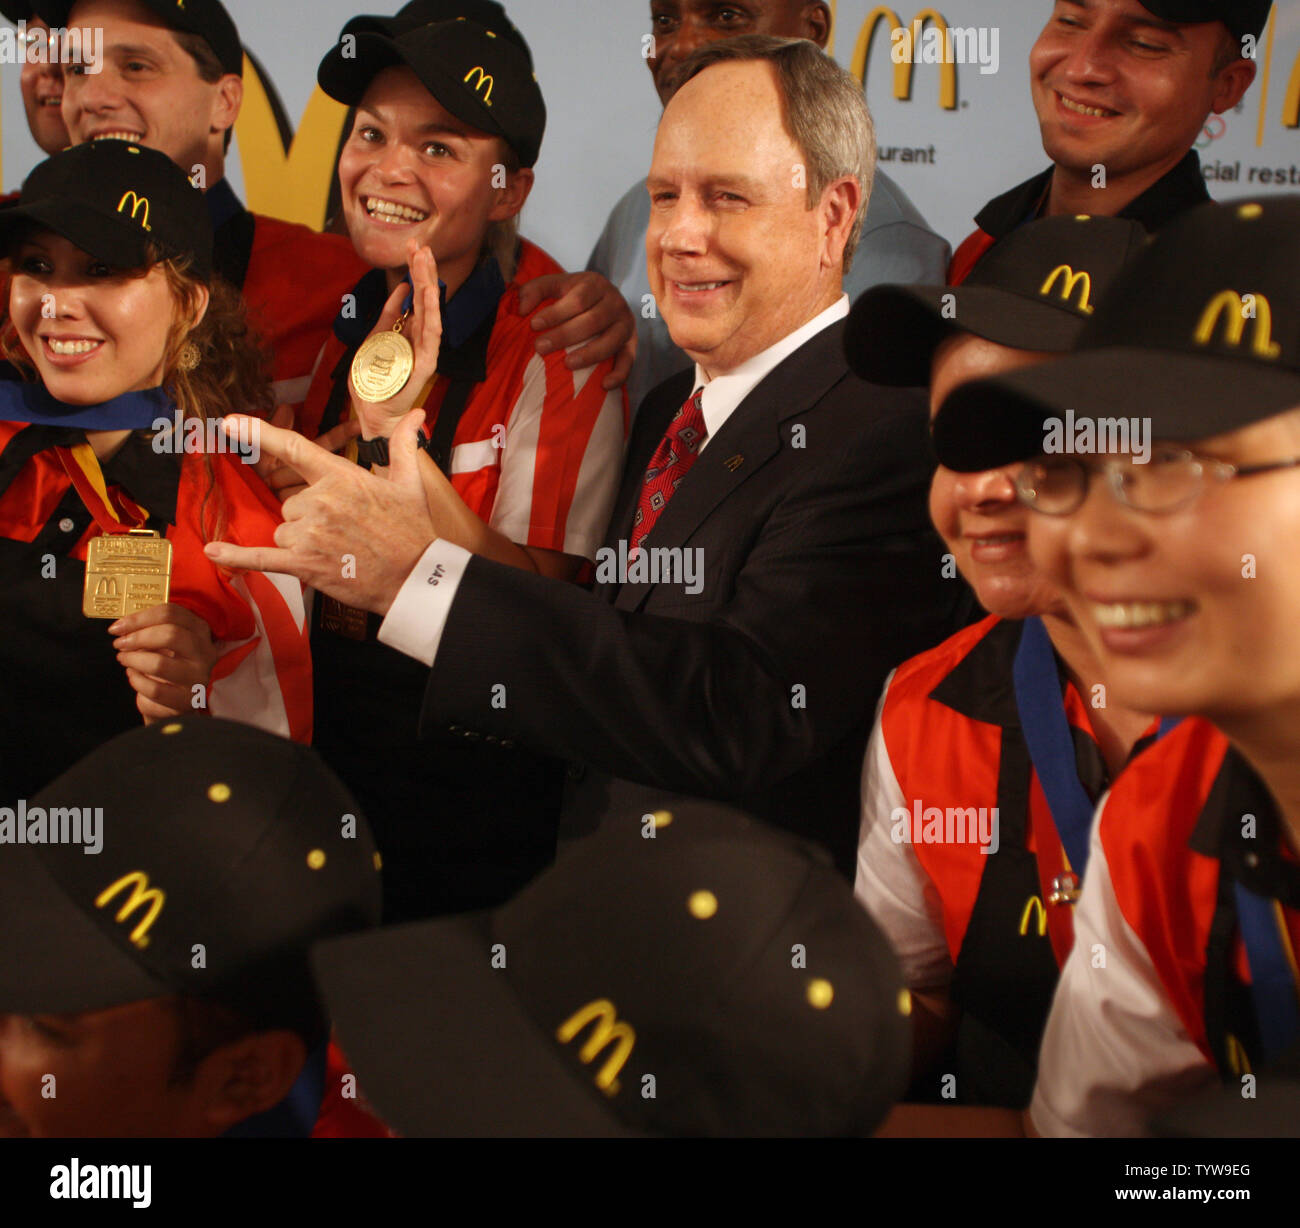 McDonald's Chief Executive Officer Jim Skinner poses with employees at a new McDonald's on the Olympic Green in Beijing on August 7, 2008. The hand sign is for 'I'm lovin' it'.  (UPI Photo/Terry Schmitt) Stock Photo